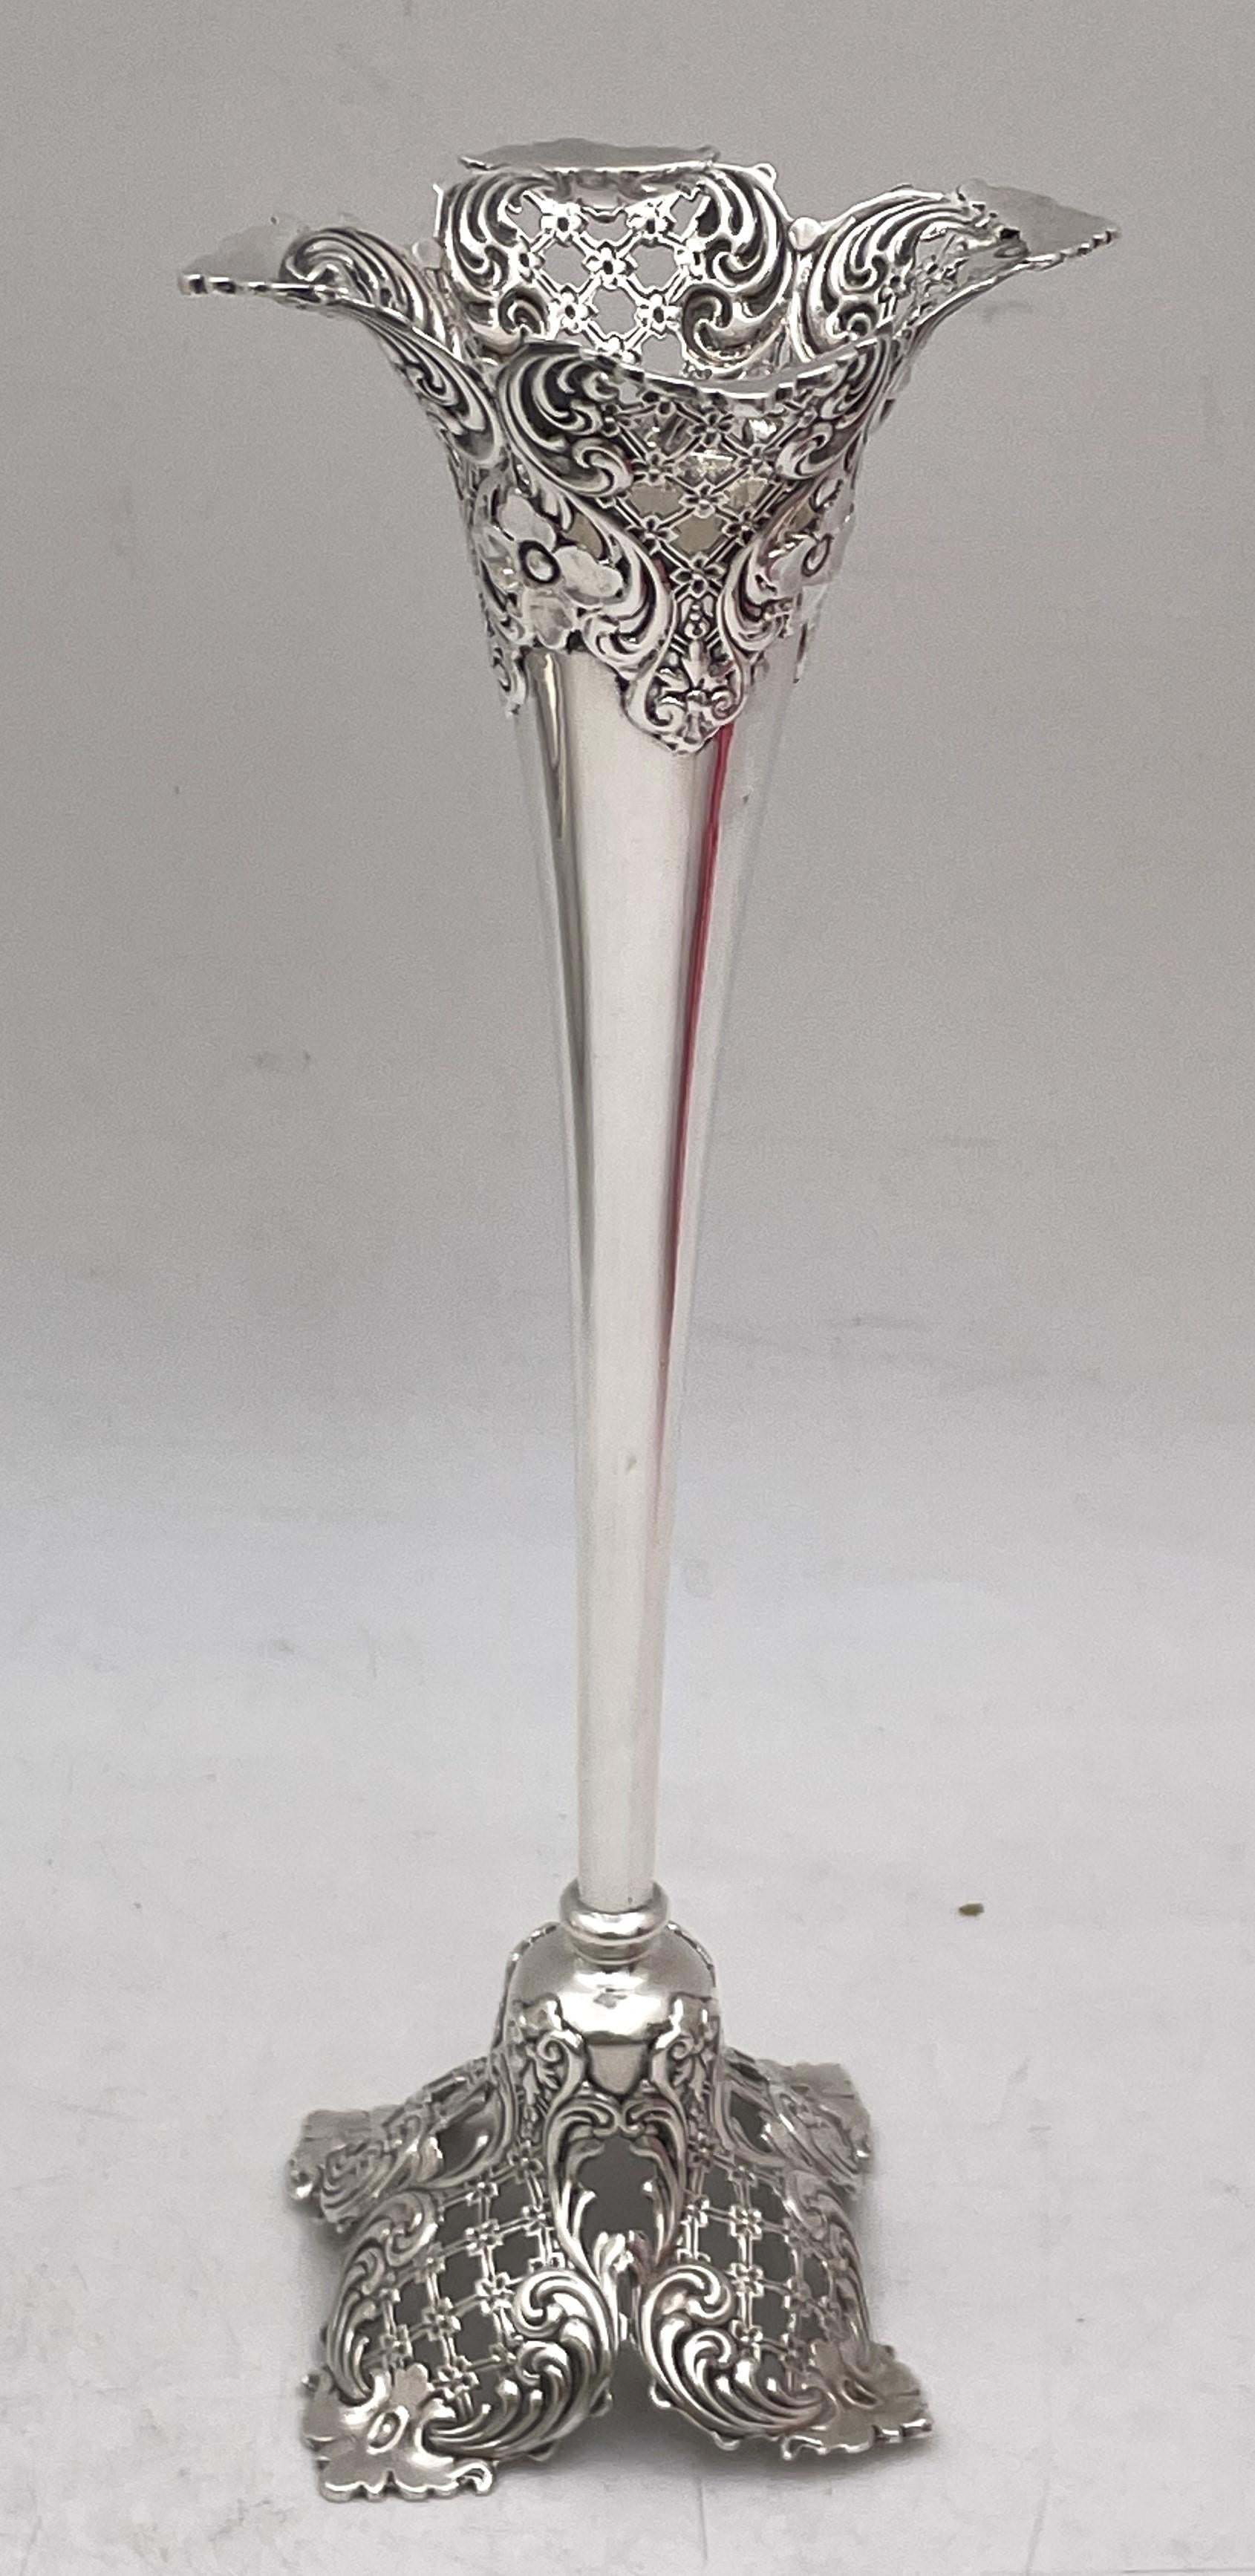 Mauser sterling silver bud vase in Art Nouveau style from the late 19th or early 20th century, beautifully adorned with pierced and floral motifs. It measures 9'' in height by 3 1/3'' in diameter at the top, weighs 4.1 troy ounces, and bears